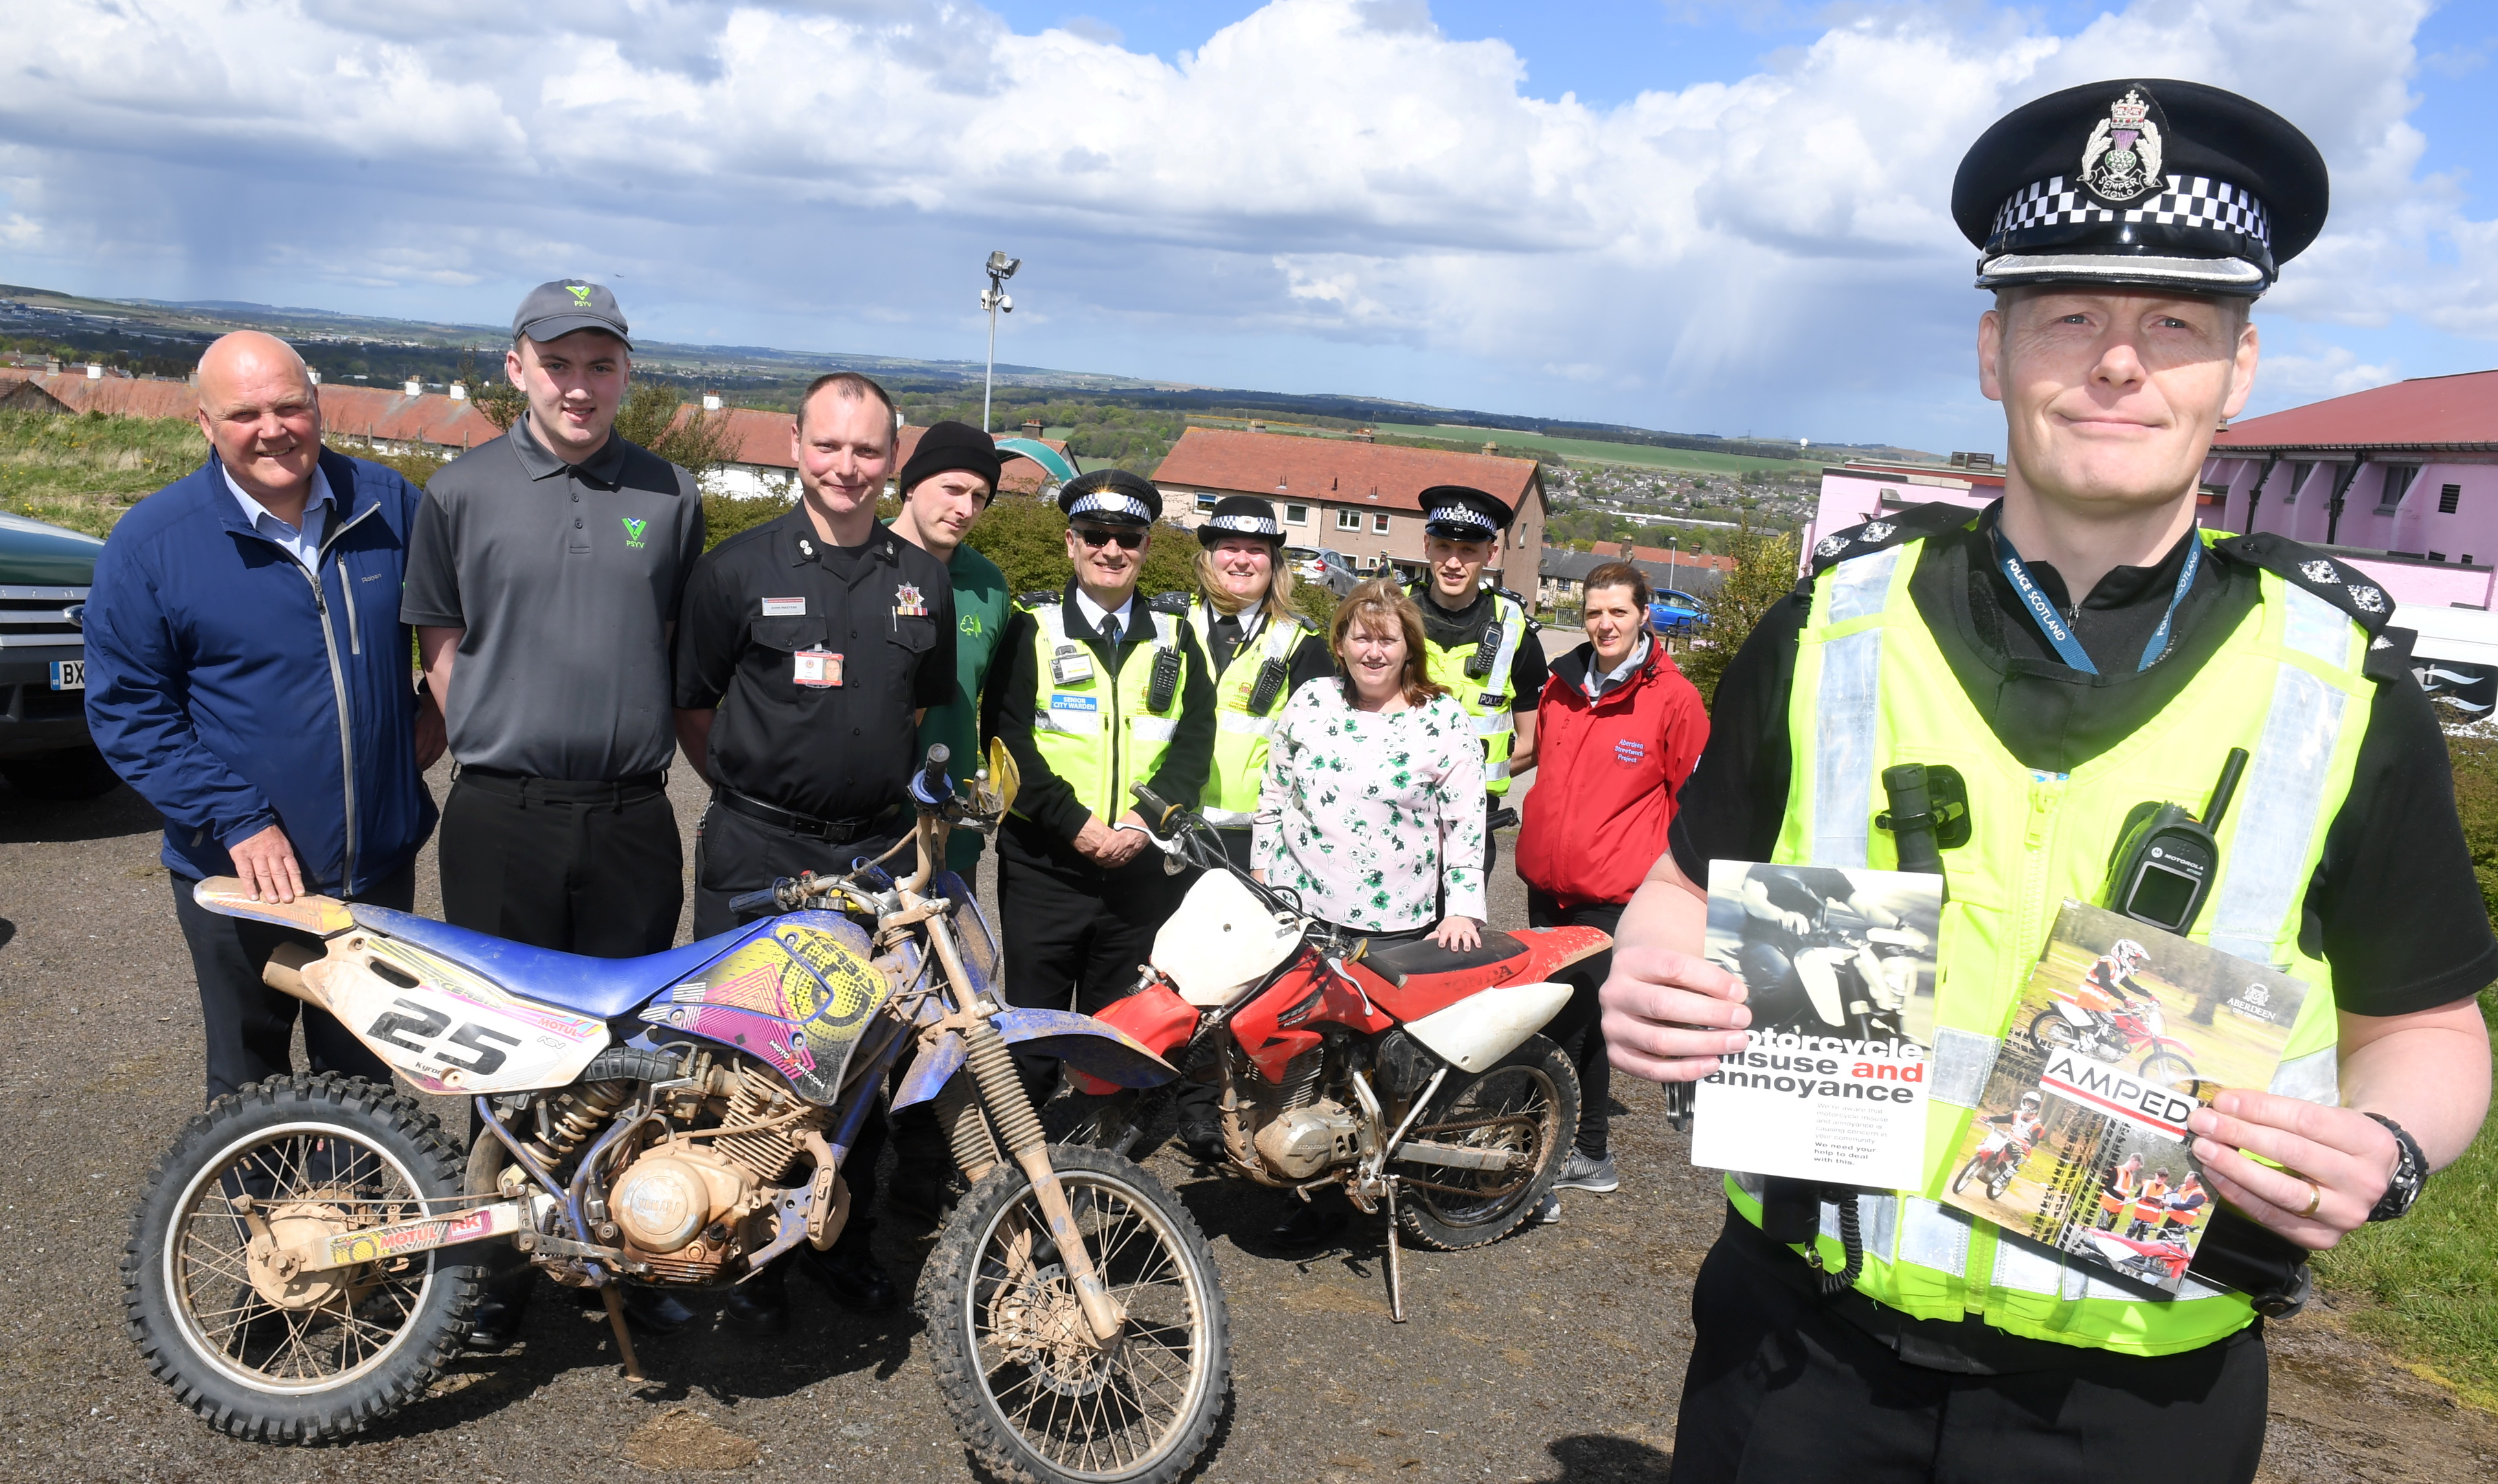 Police Scotland launched Operation Armour, formerly Operation Trinity to crack down on anti-social motorcycle riding